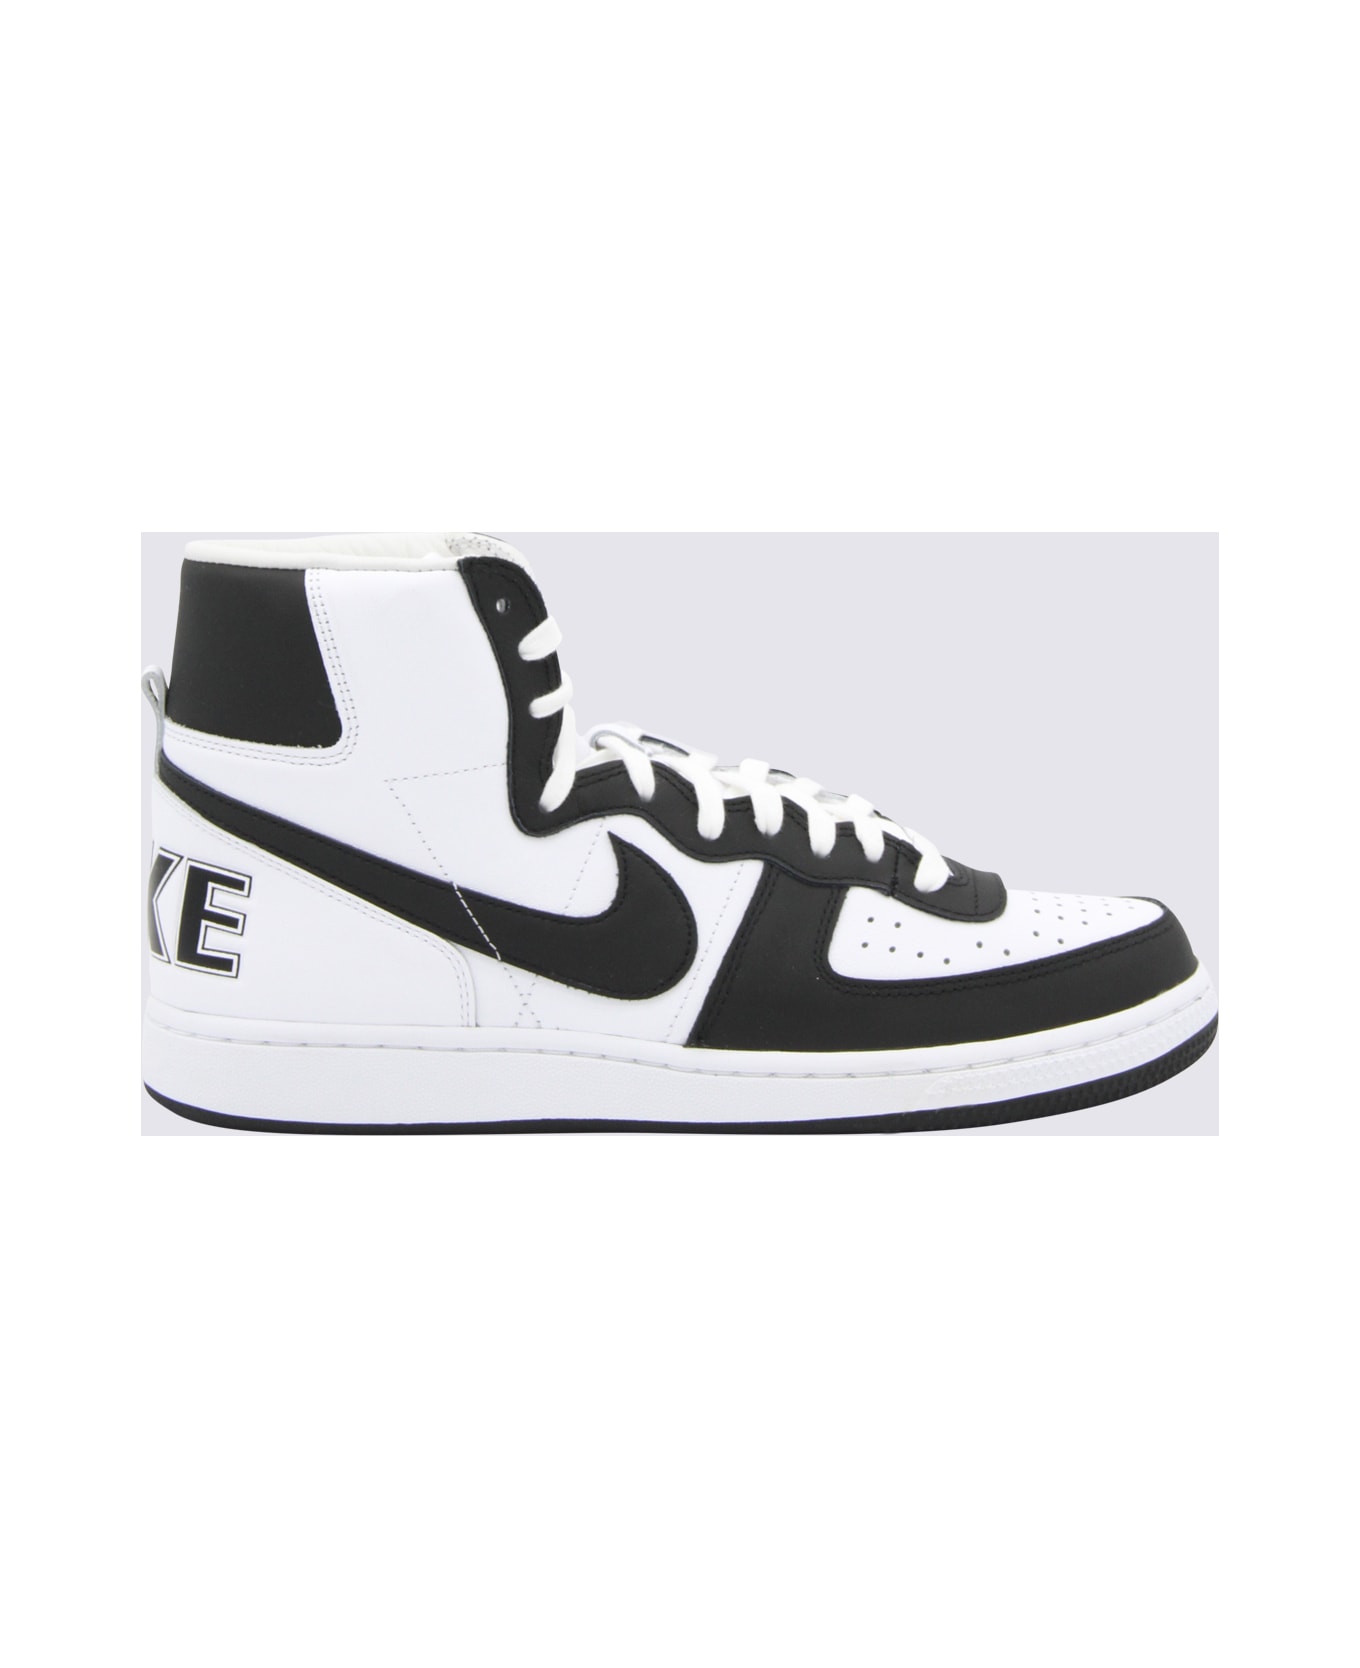 Comme des Garçons Black And White Leather Sneakers - Black